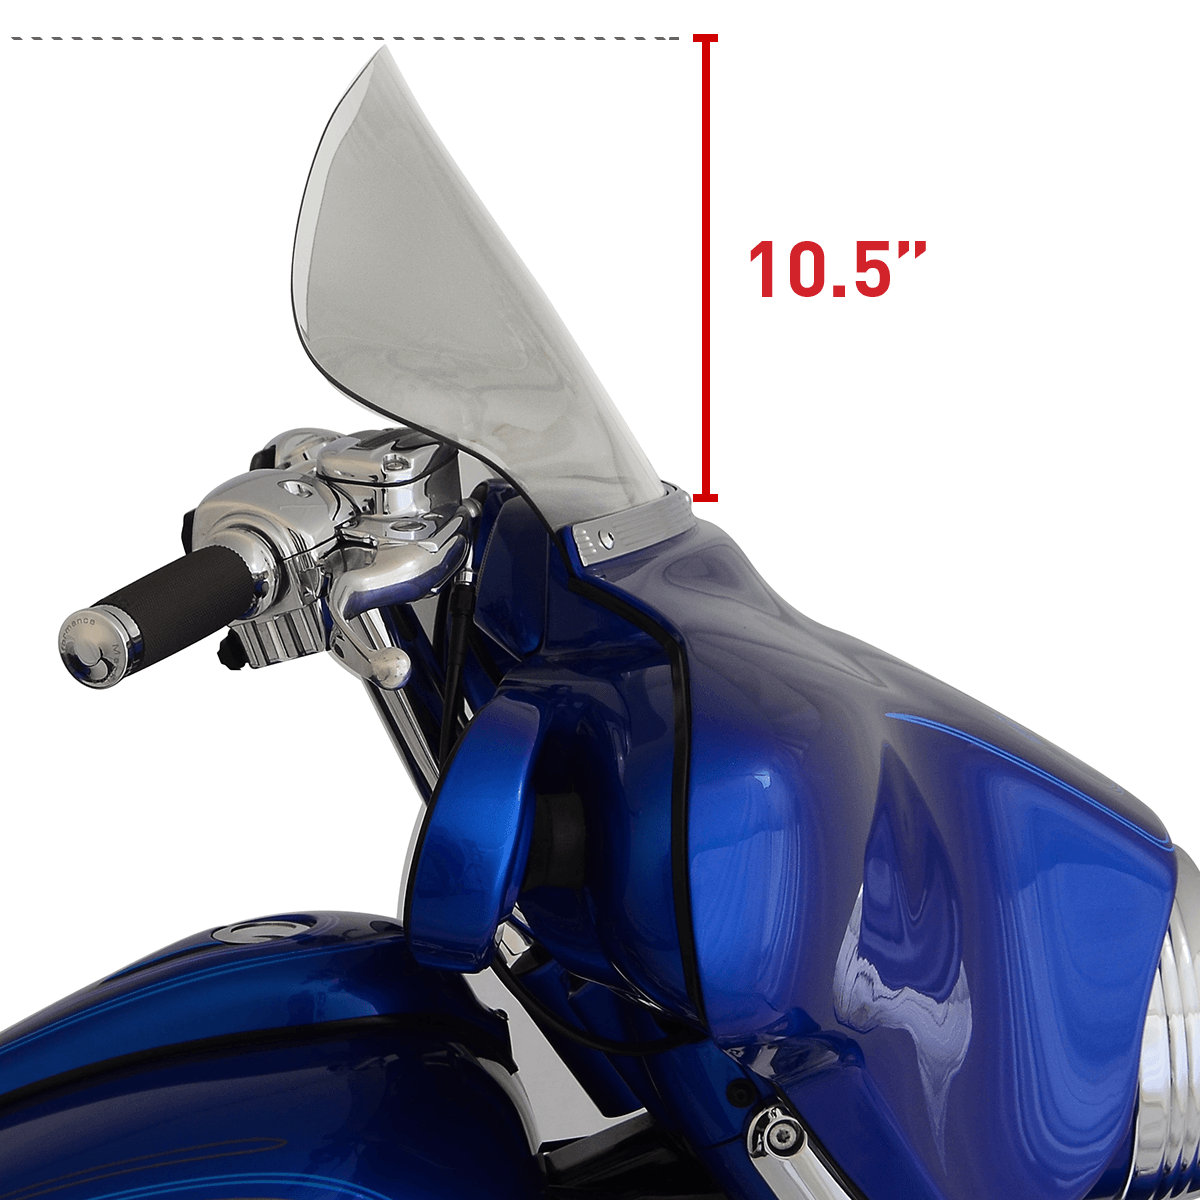 11.5" Tint Flare™ Windshield for Harley-Davidson 1996-2013 FLH Motorcycle Models(11.5" Tint)